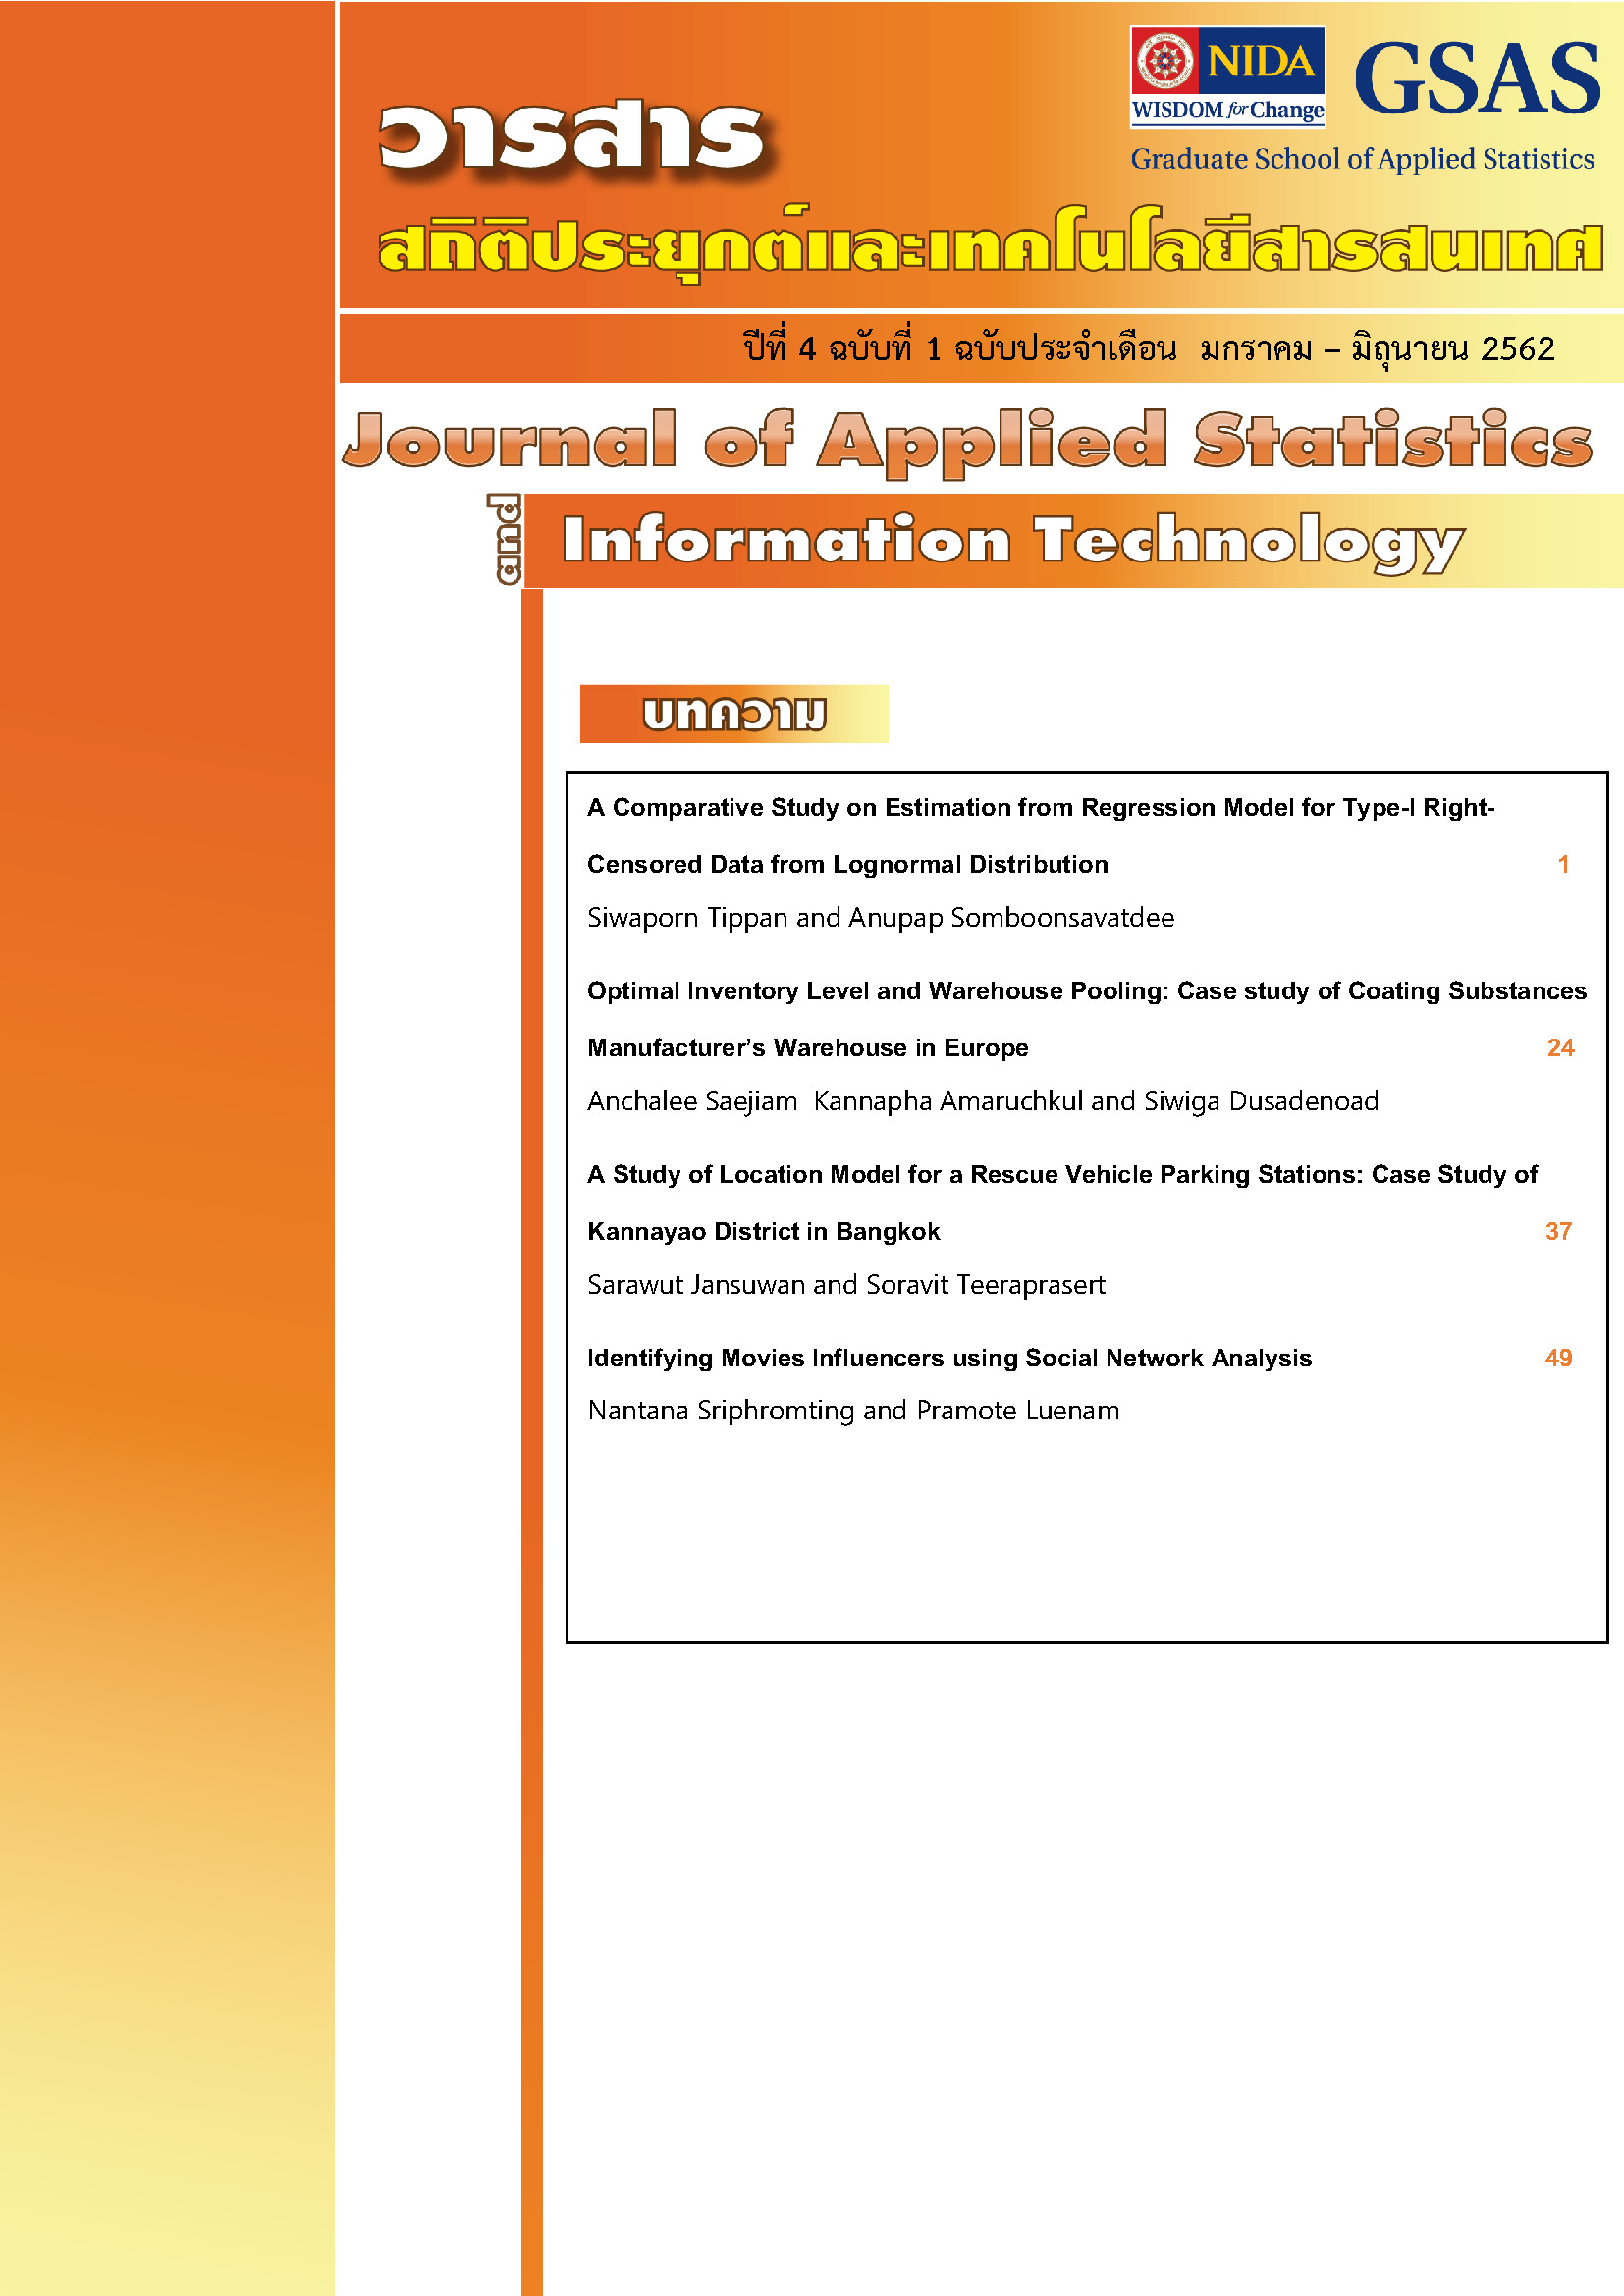 					View Vol. 4 No. 1 (2019): Journal of Applied Statistics and Information Technology Vol 4 No 1 (January - June 2019)
				